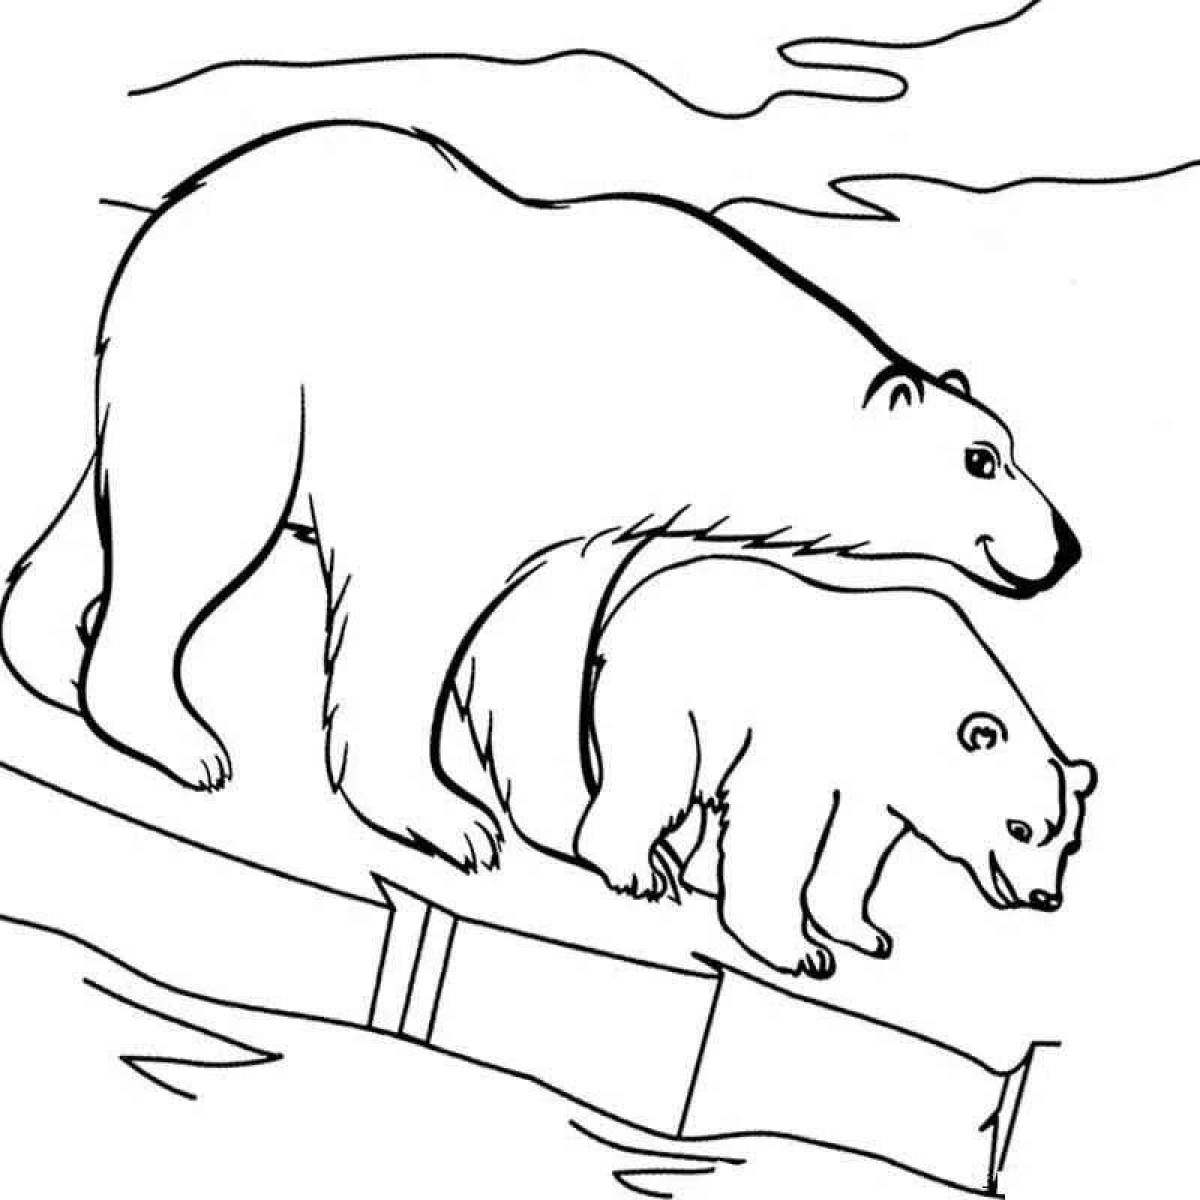 Adorable northern bear coloring page